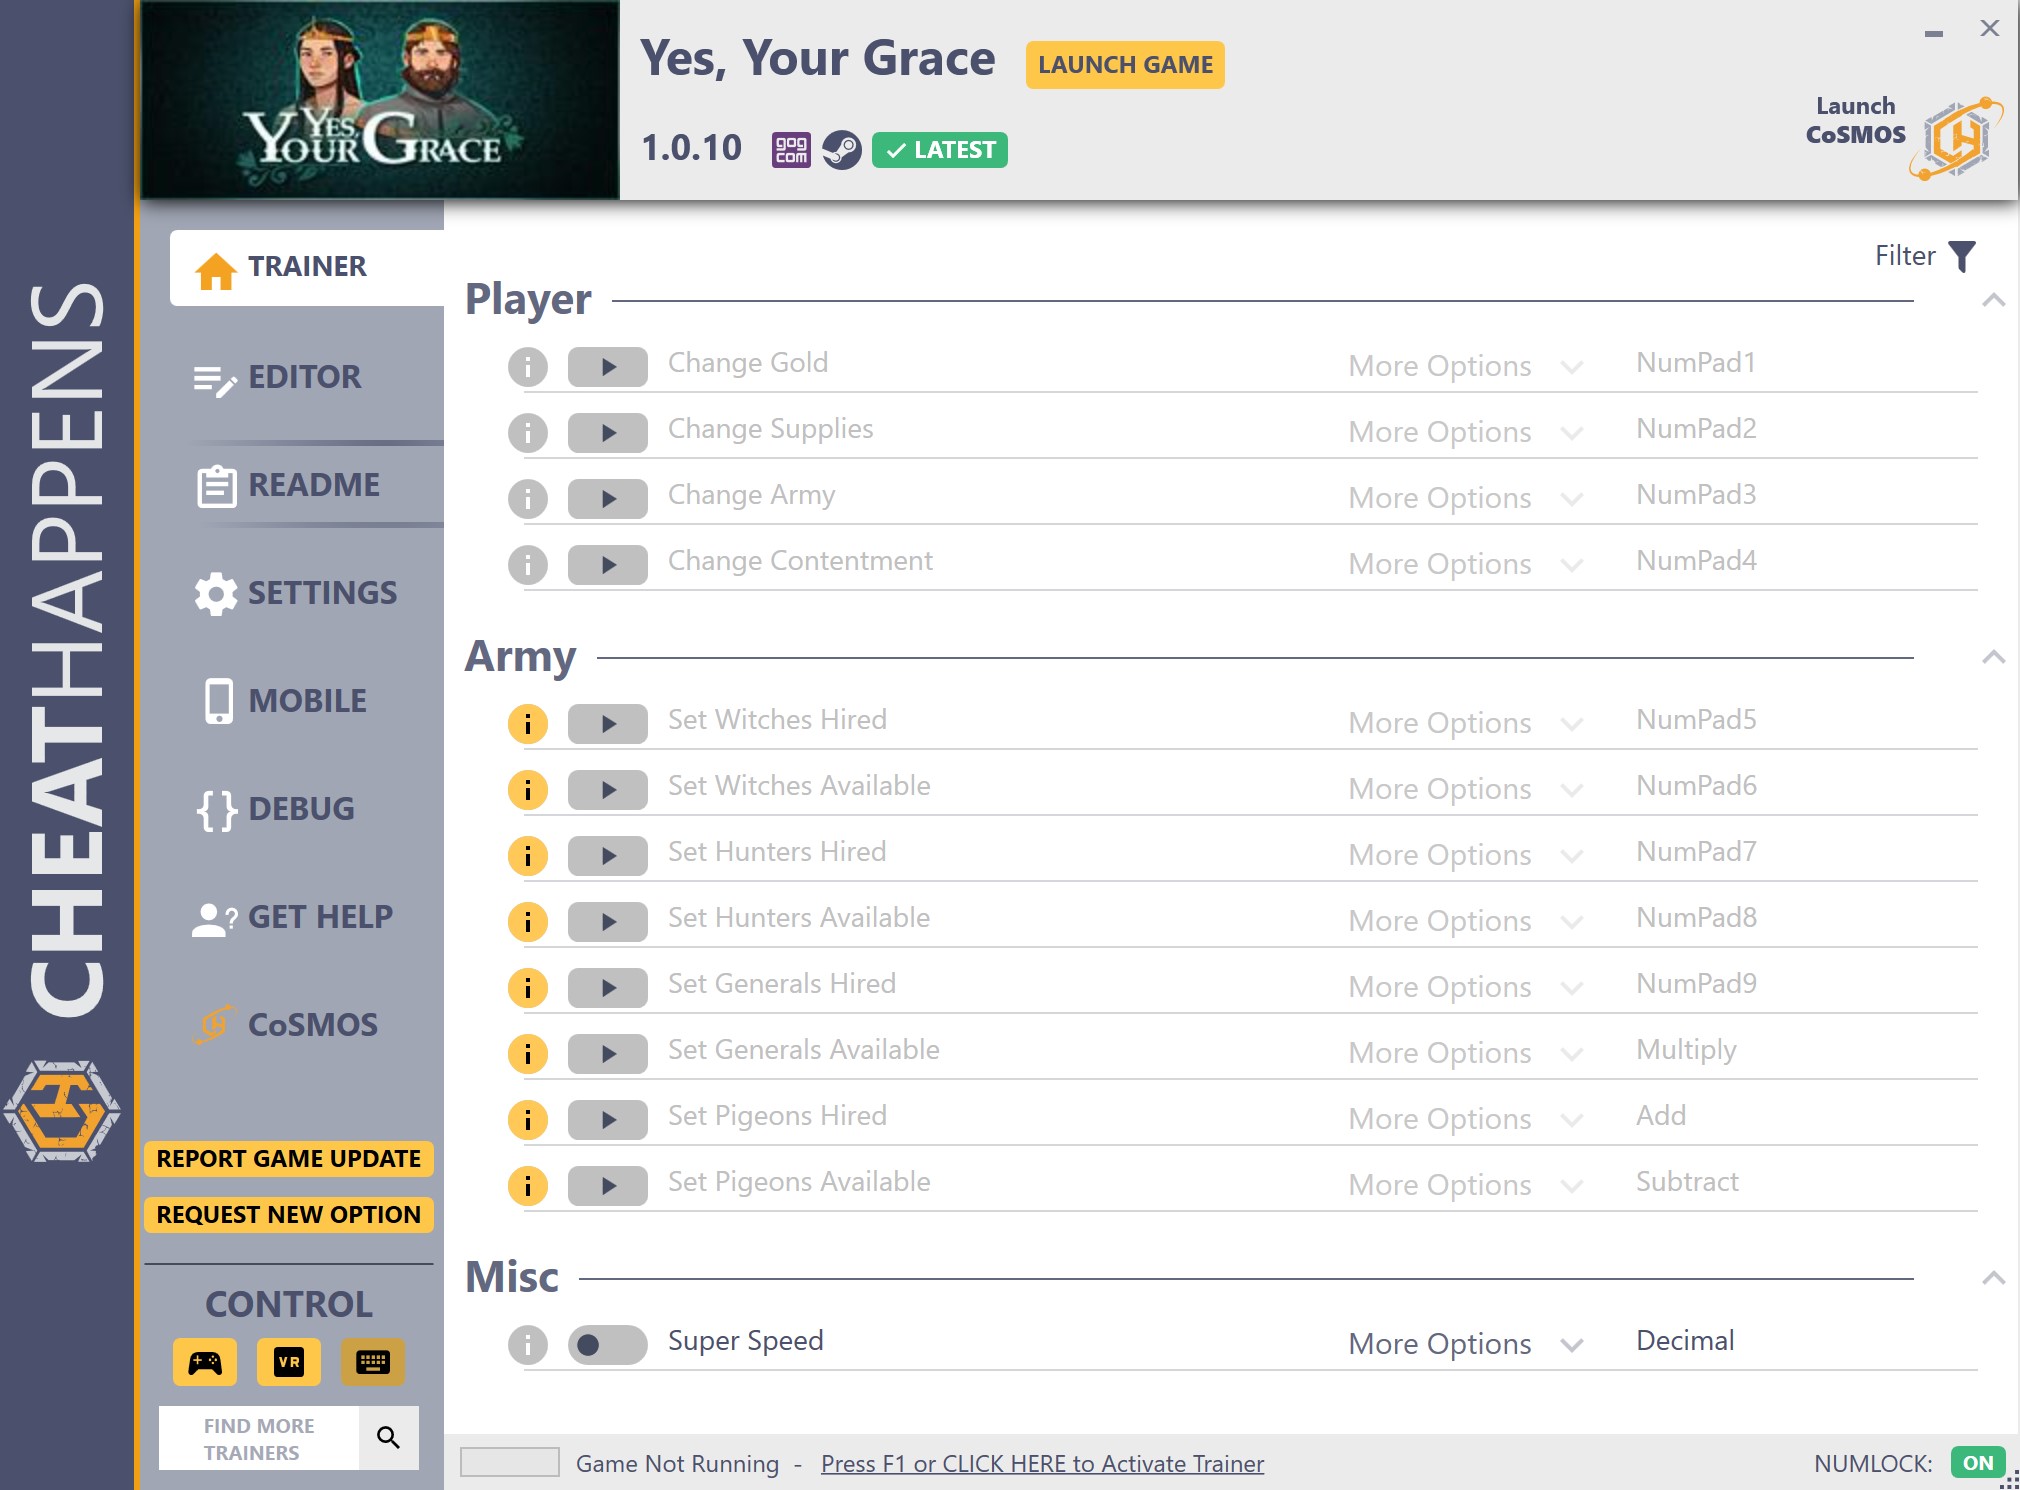 Yes, Your Grace v1.0.1.0 Trainer